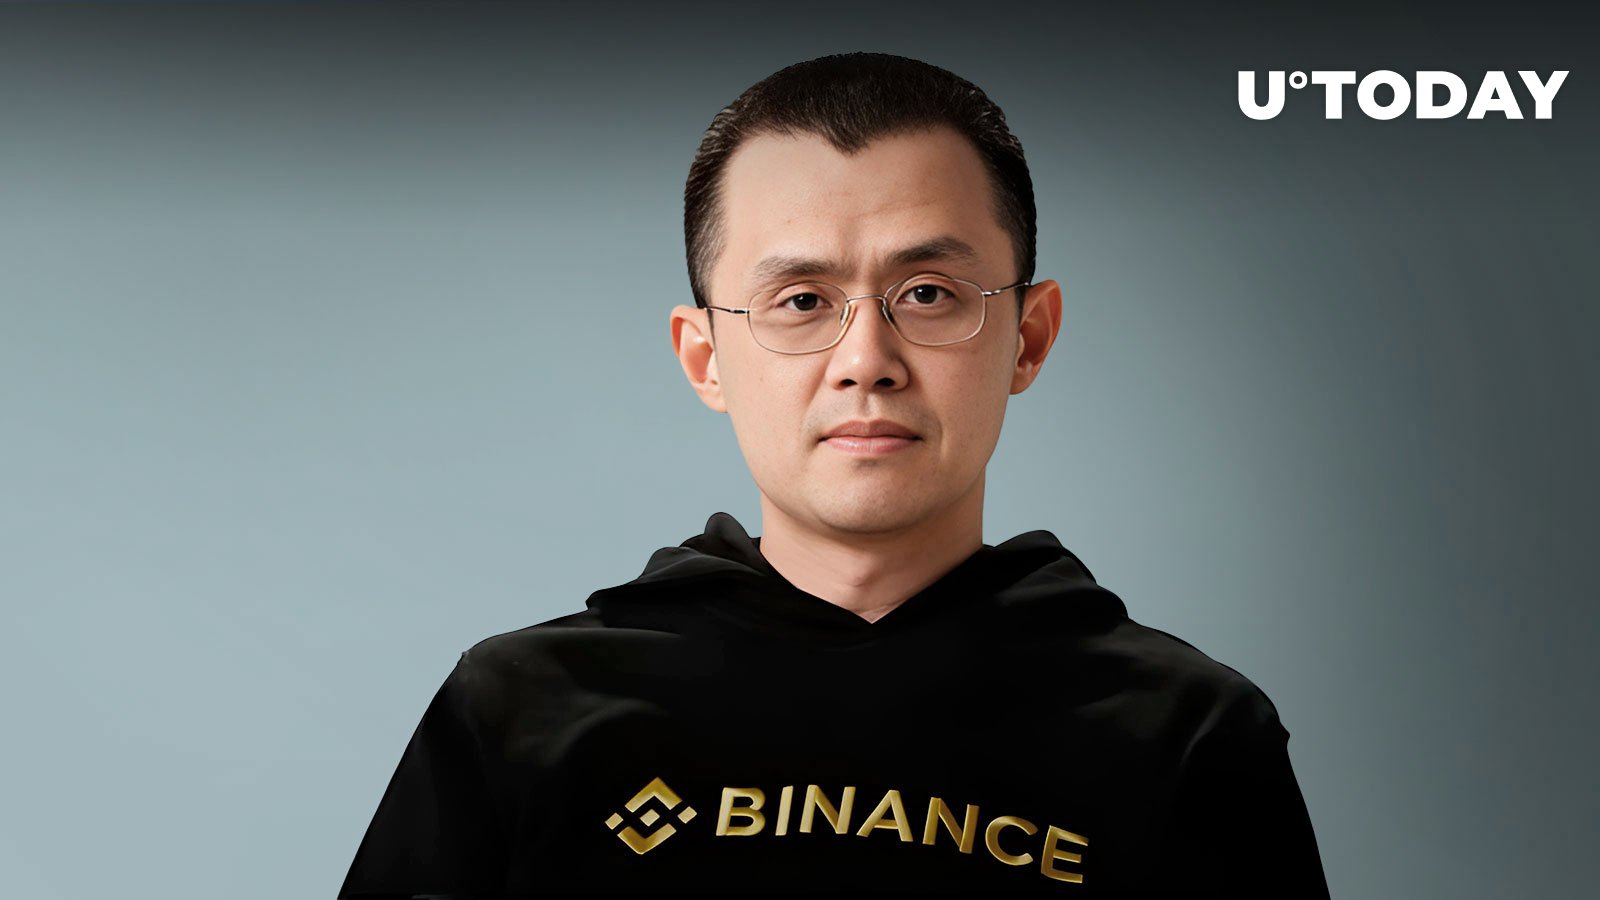 Ex-Binance CEO CZ Might Be Headed to Prison, But BNB Price Is Pumping